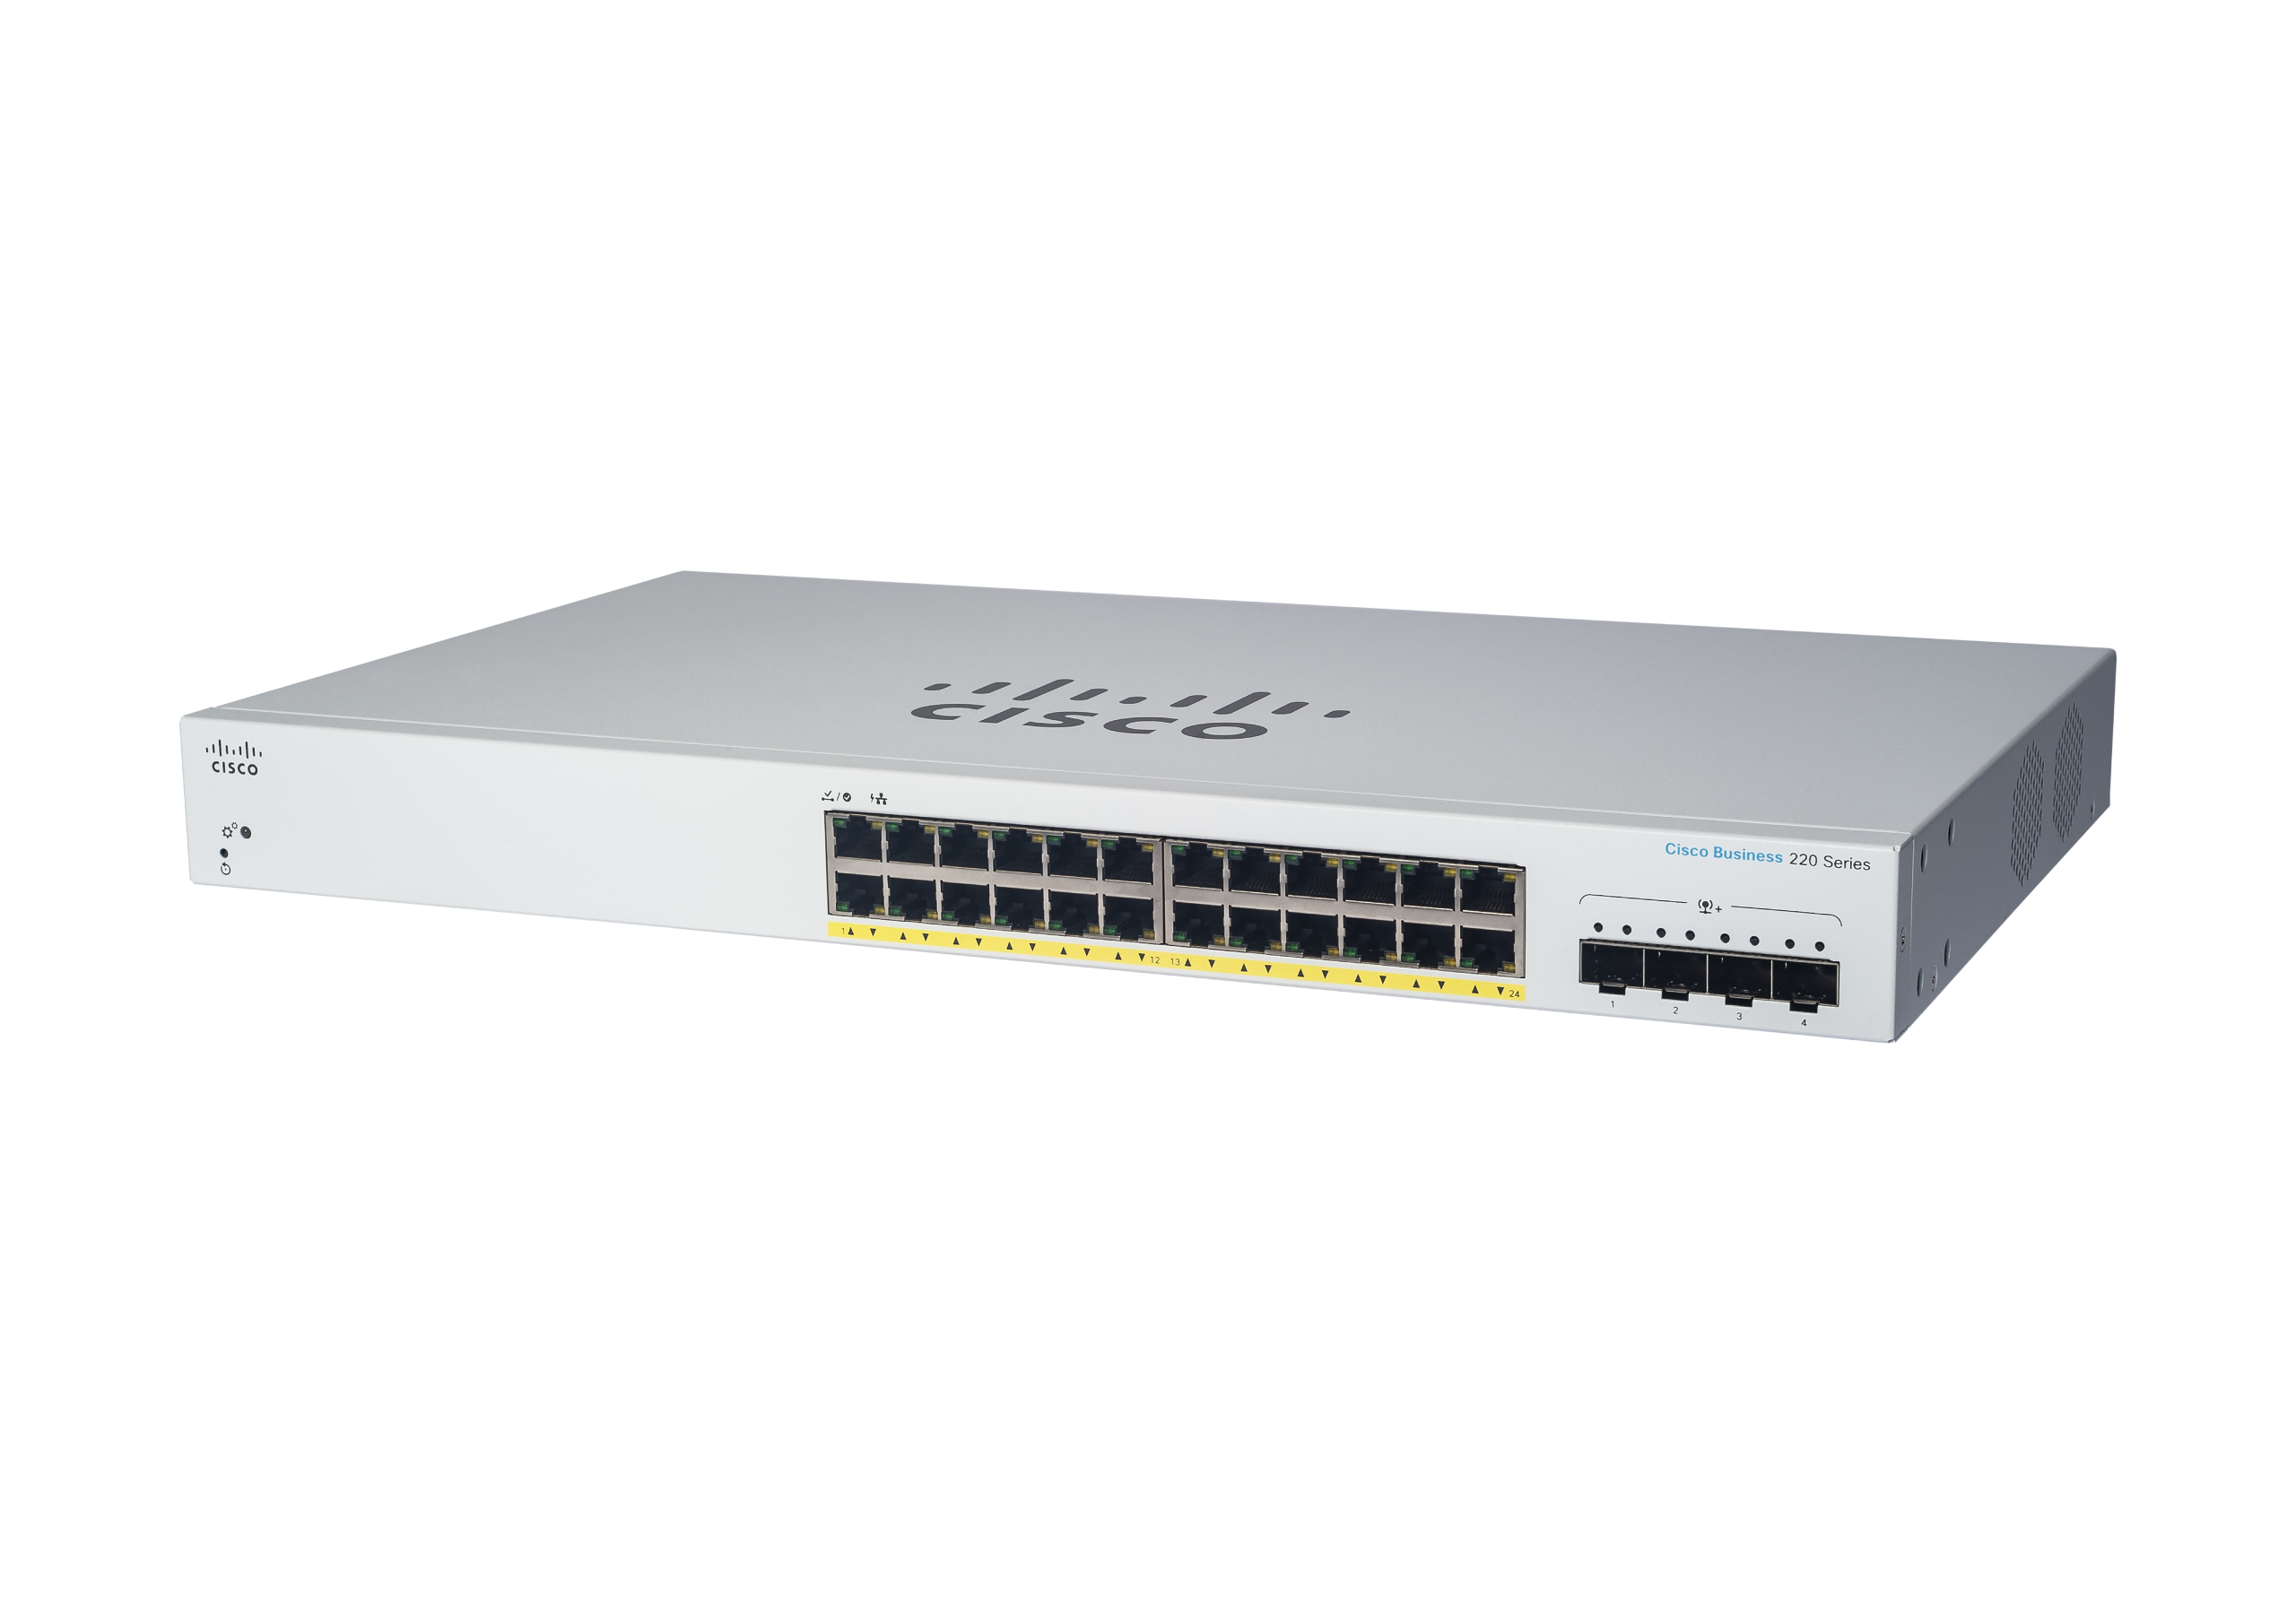 Cisco+Business+CBS220-24FP-4G+24+Port+Layer+2+Managed+Ethernet+Switch